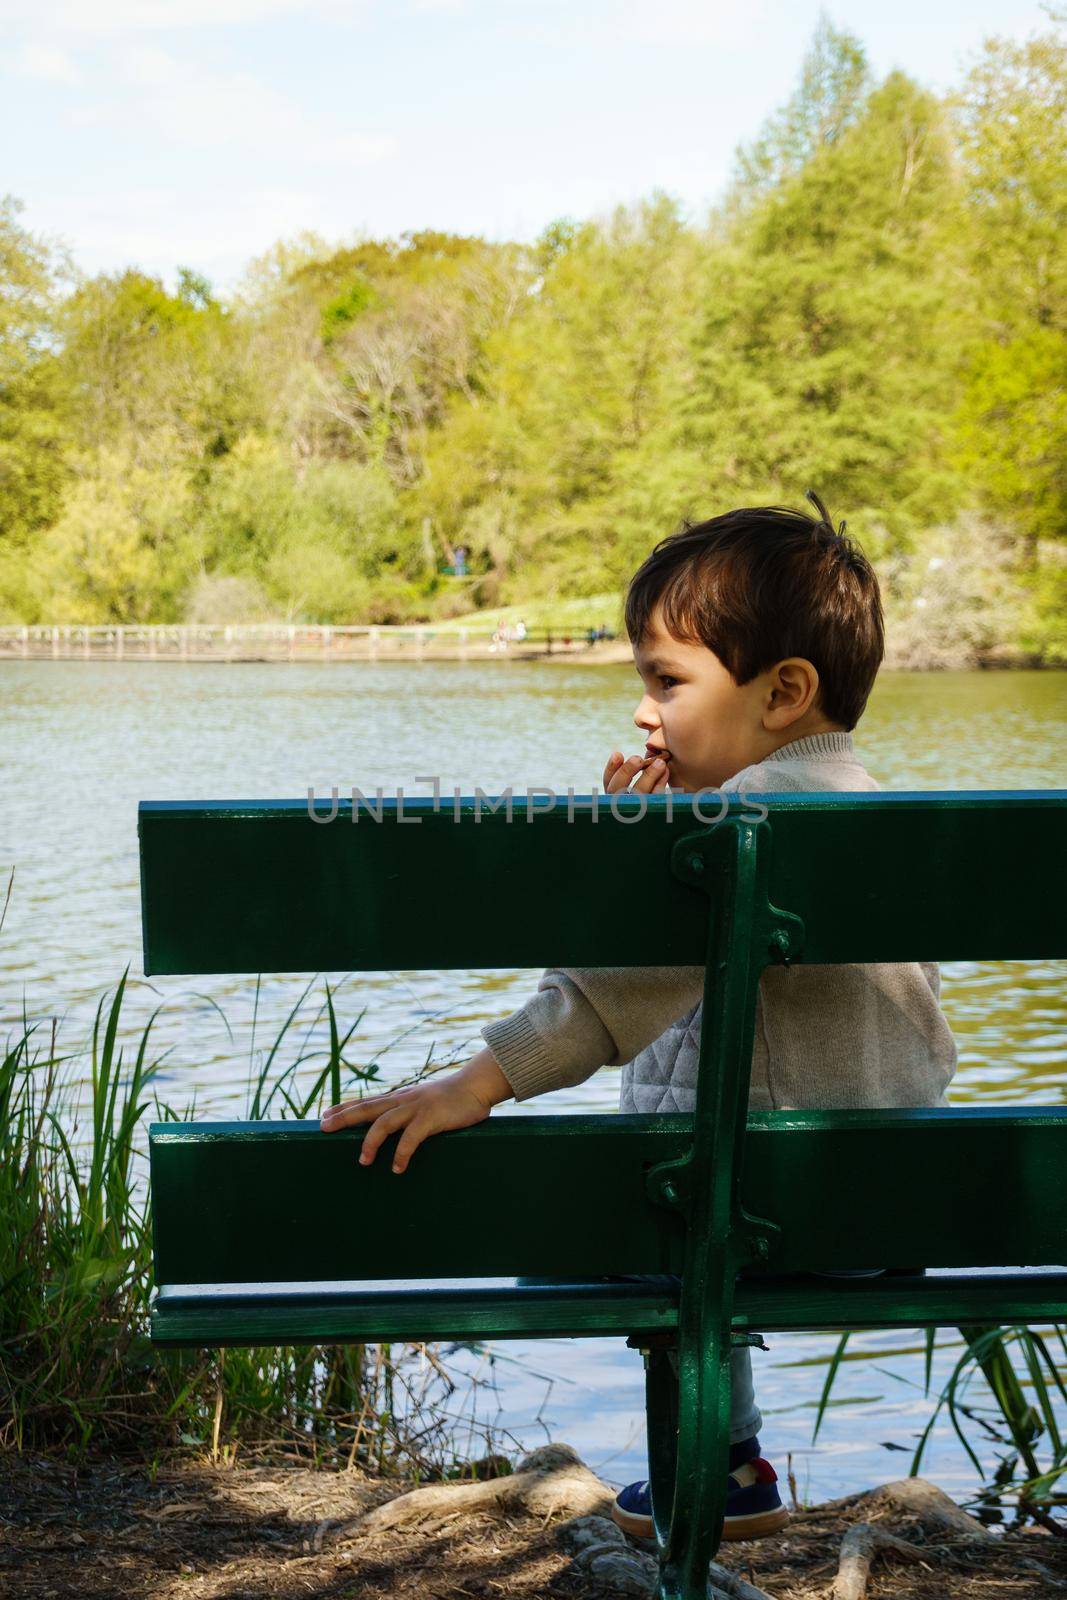 Little boy eating a biscuit on bench on lakeshore, spring season